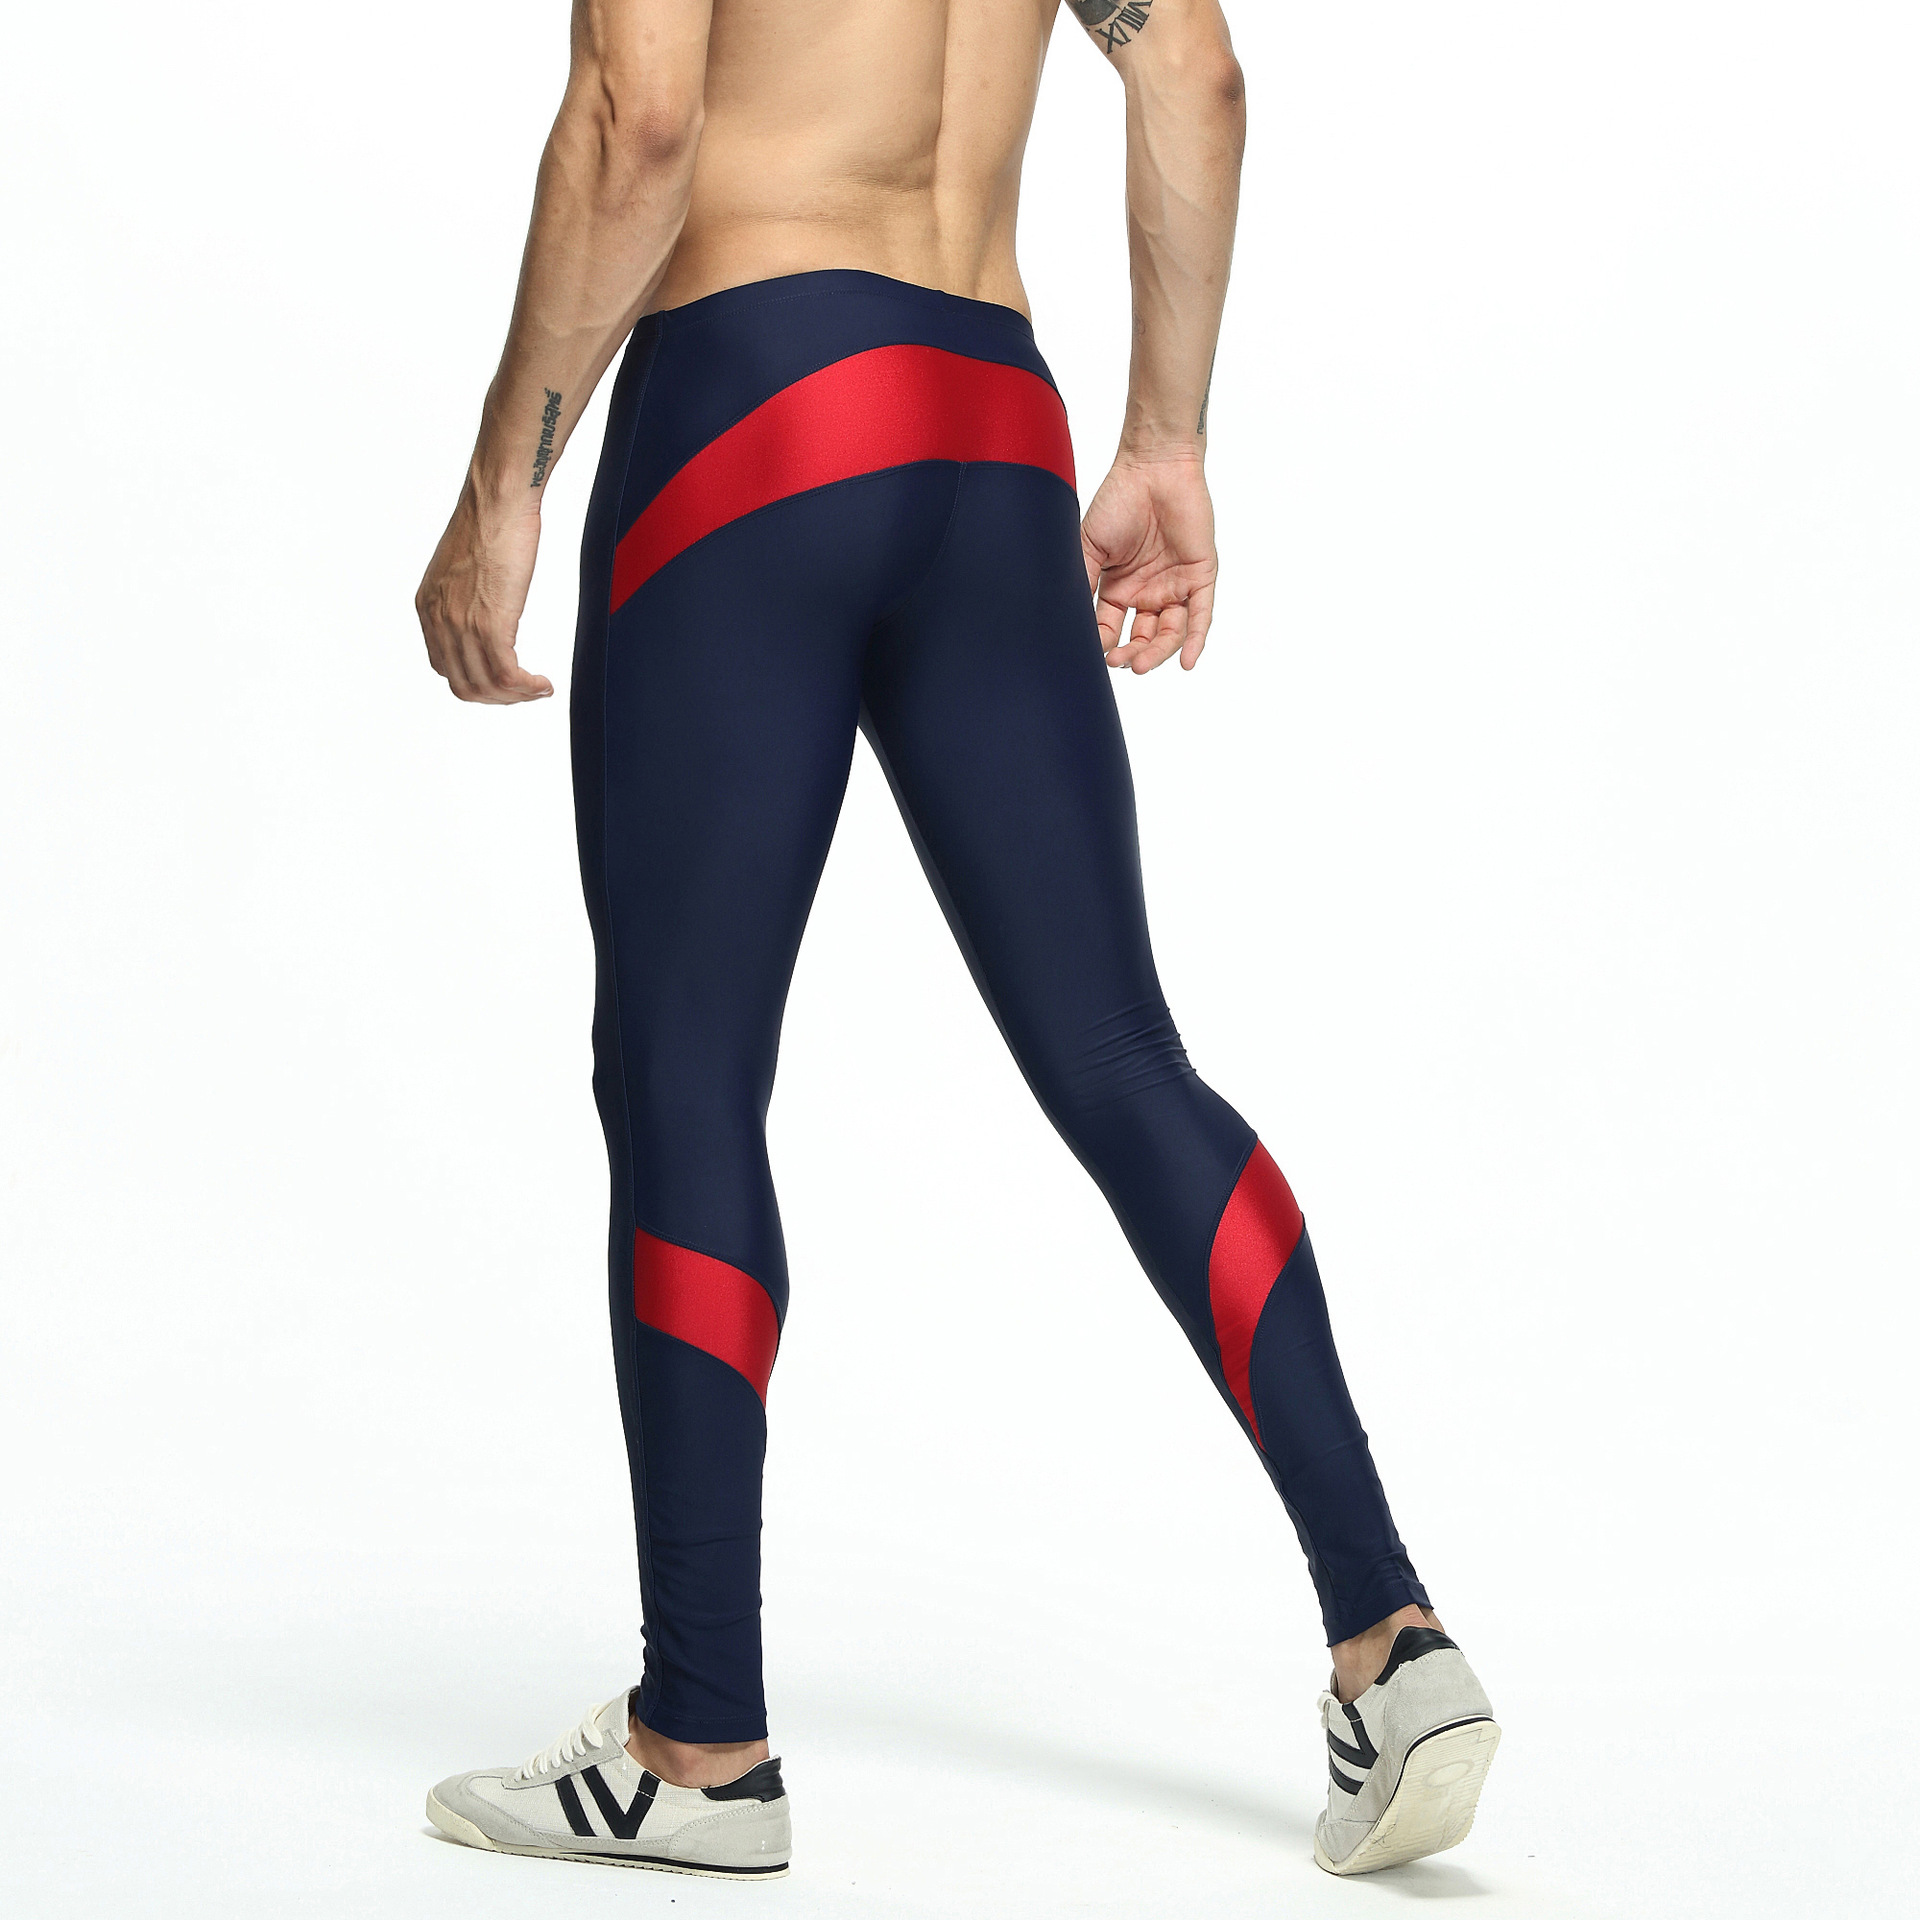 Men's Low Waist Stretch Tights Men's Sports Tights Wholesale Men's Trousers